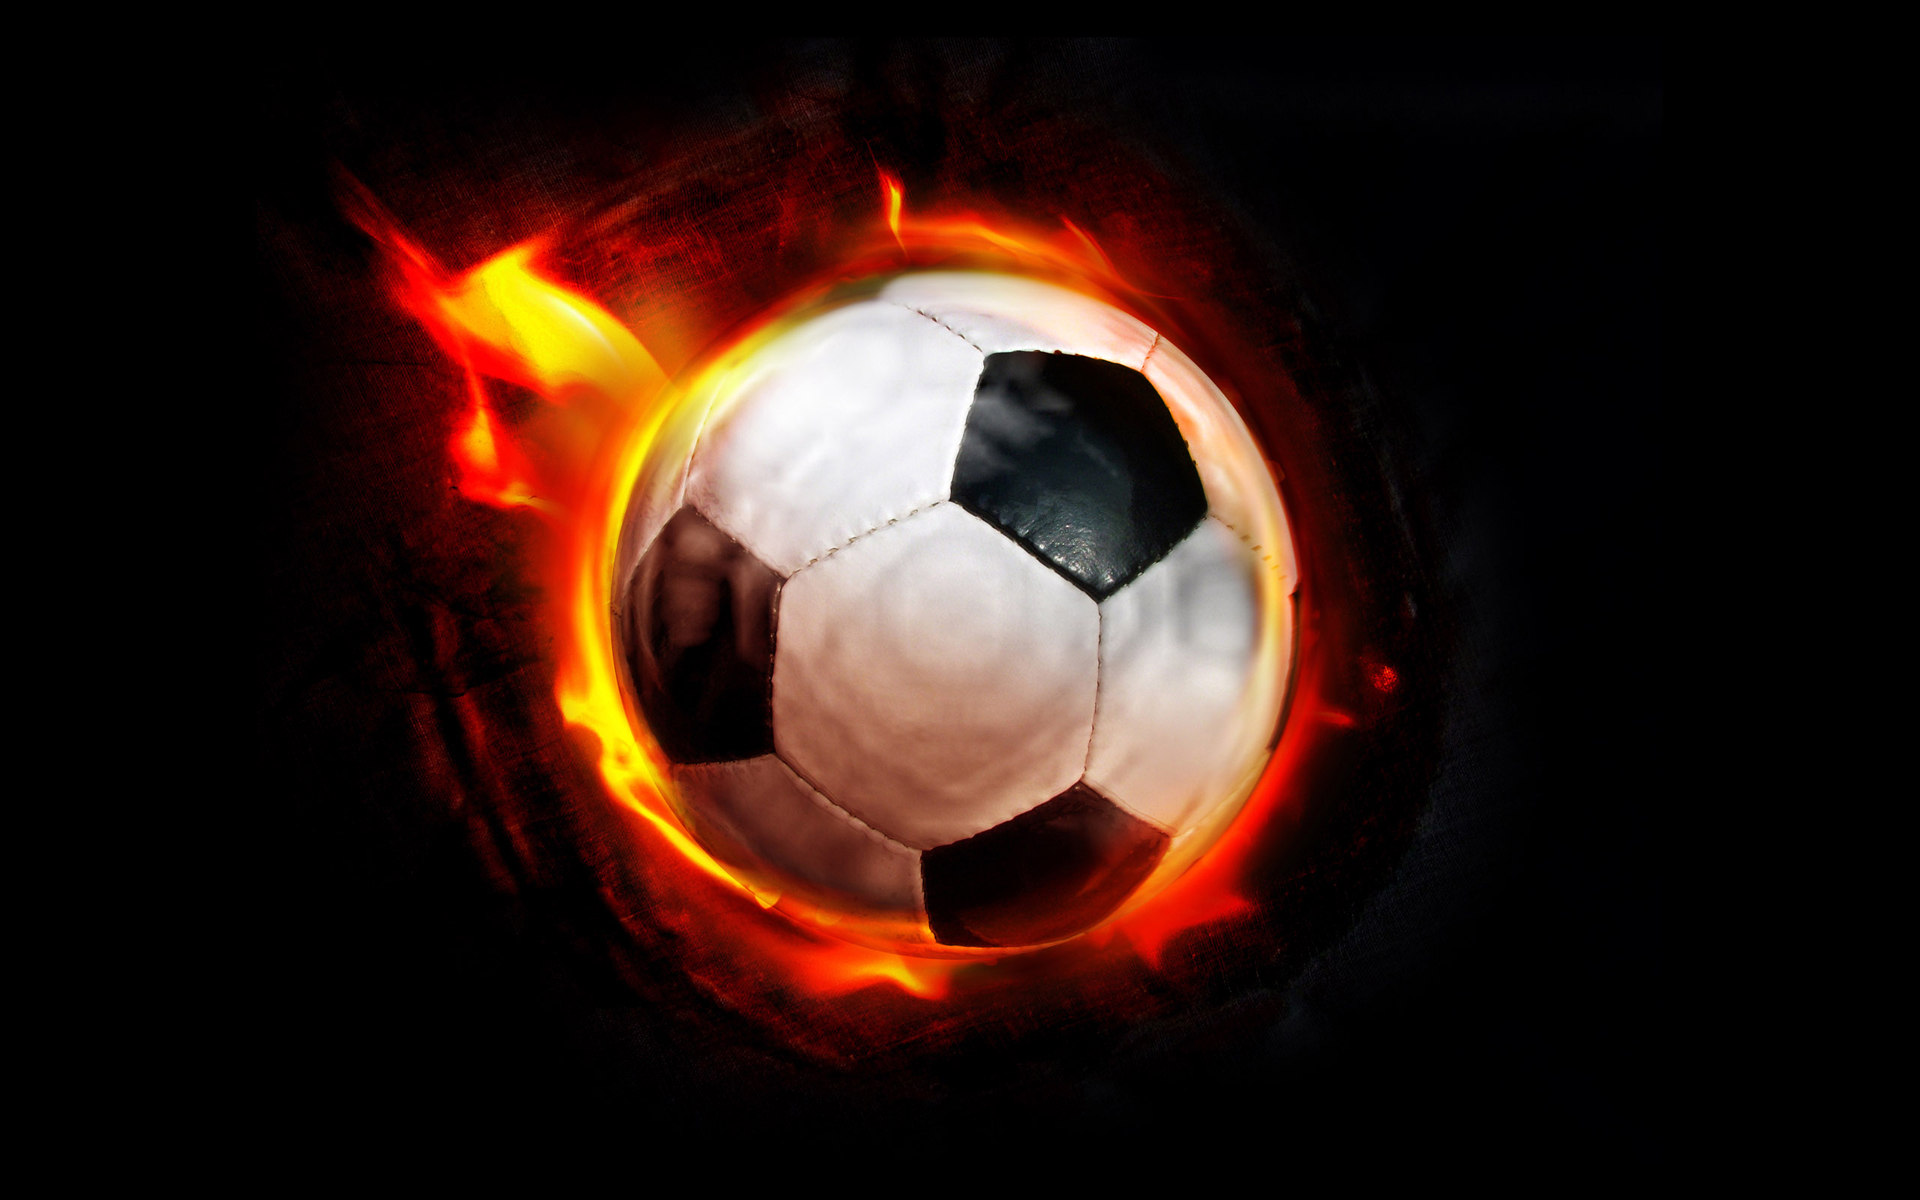 hd soccer 12 wallpaper you are viewing the sports wallpaper named hd 1920x1200